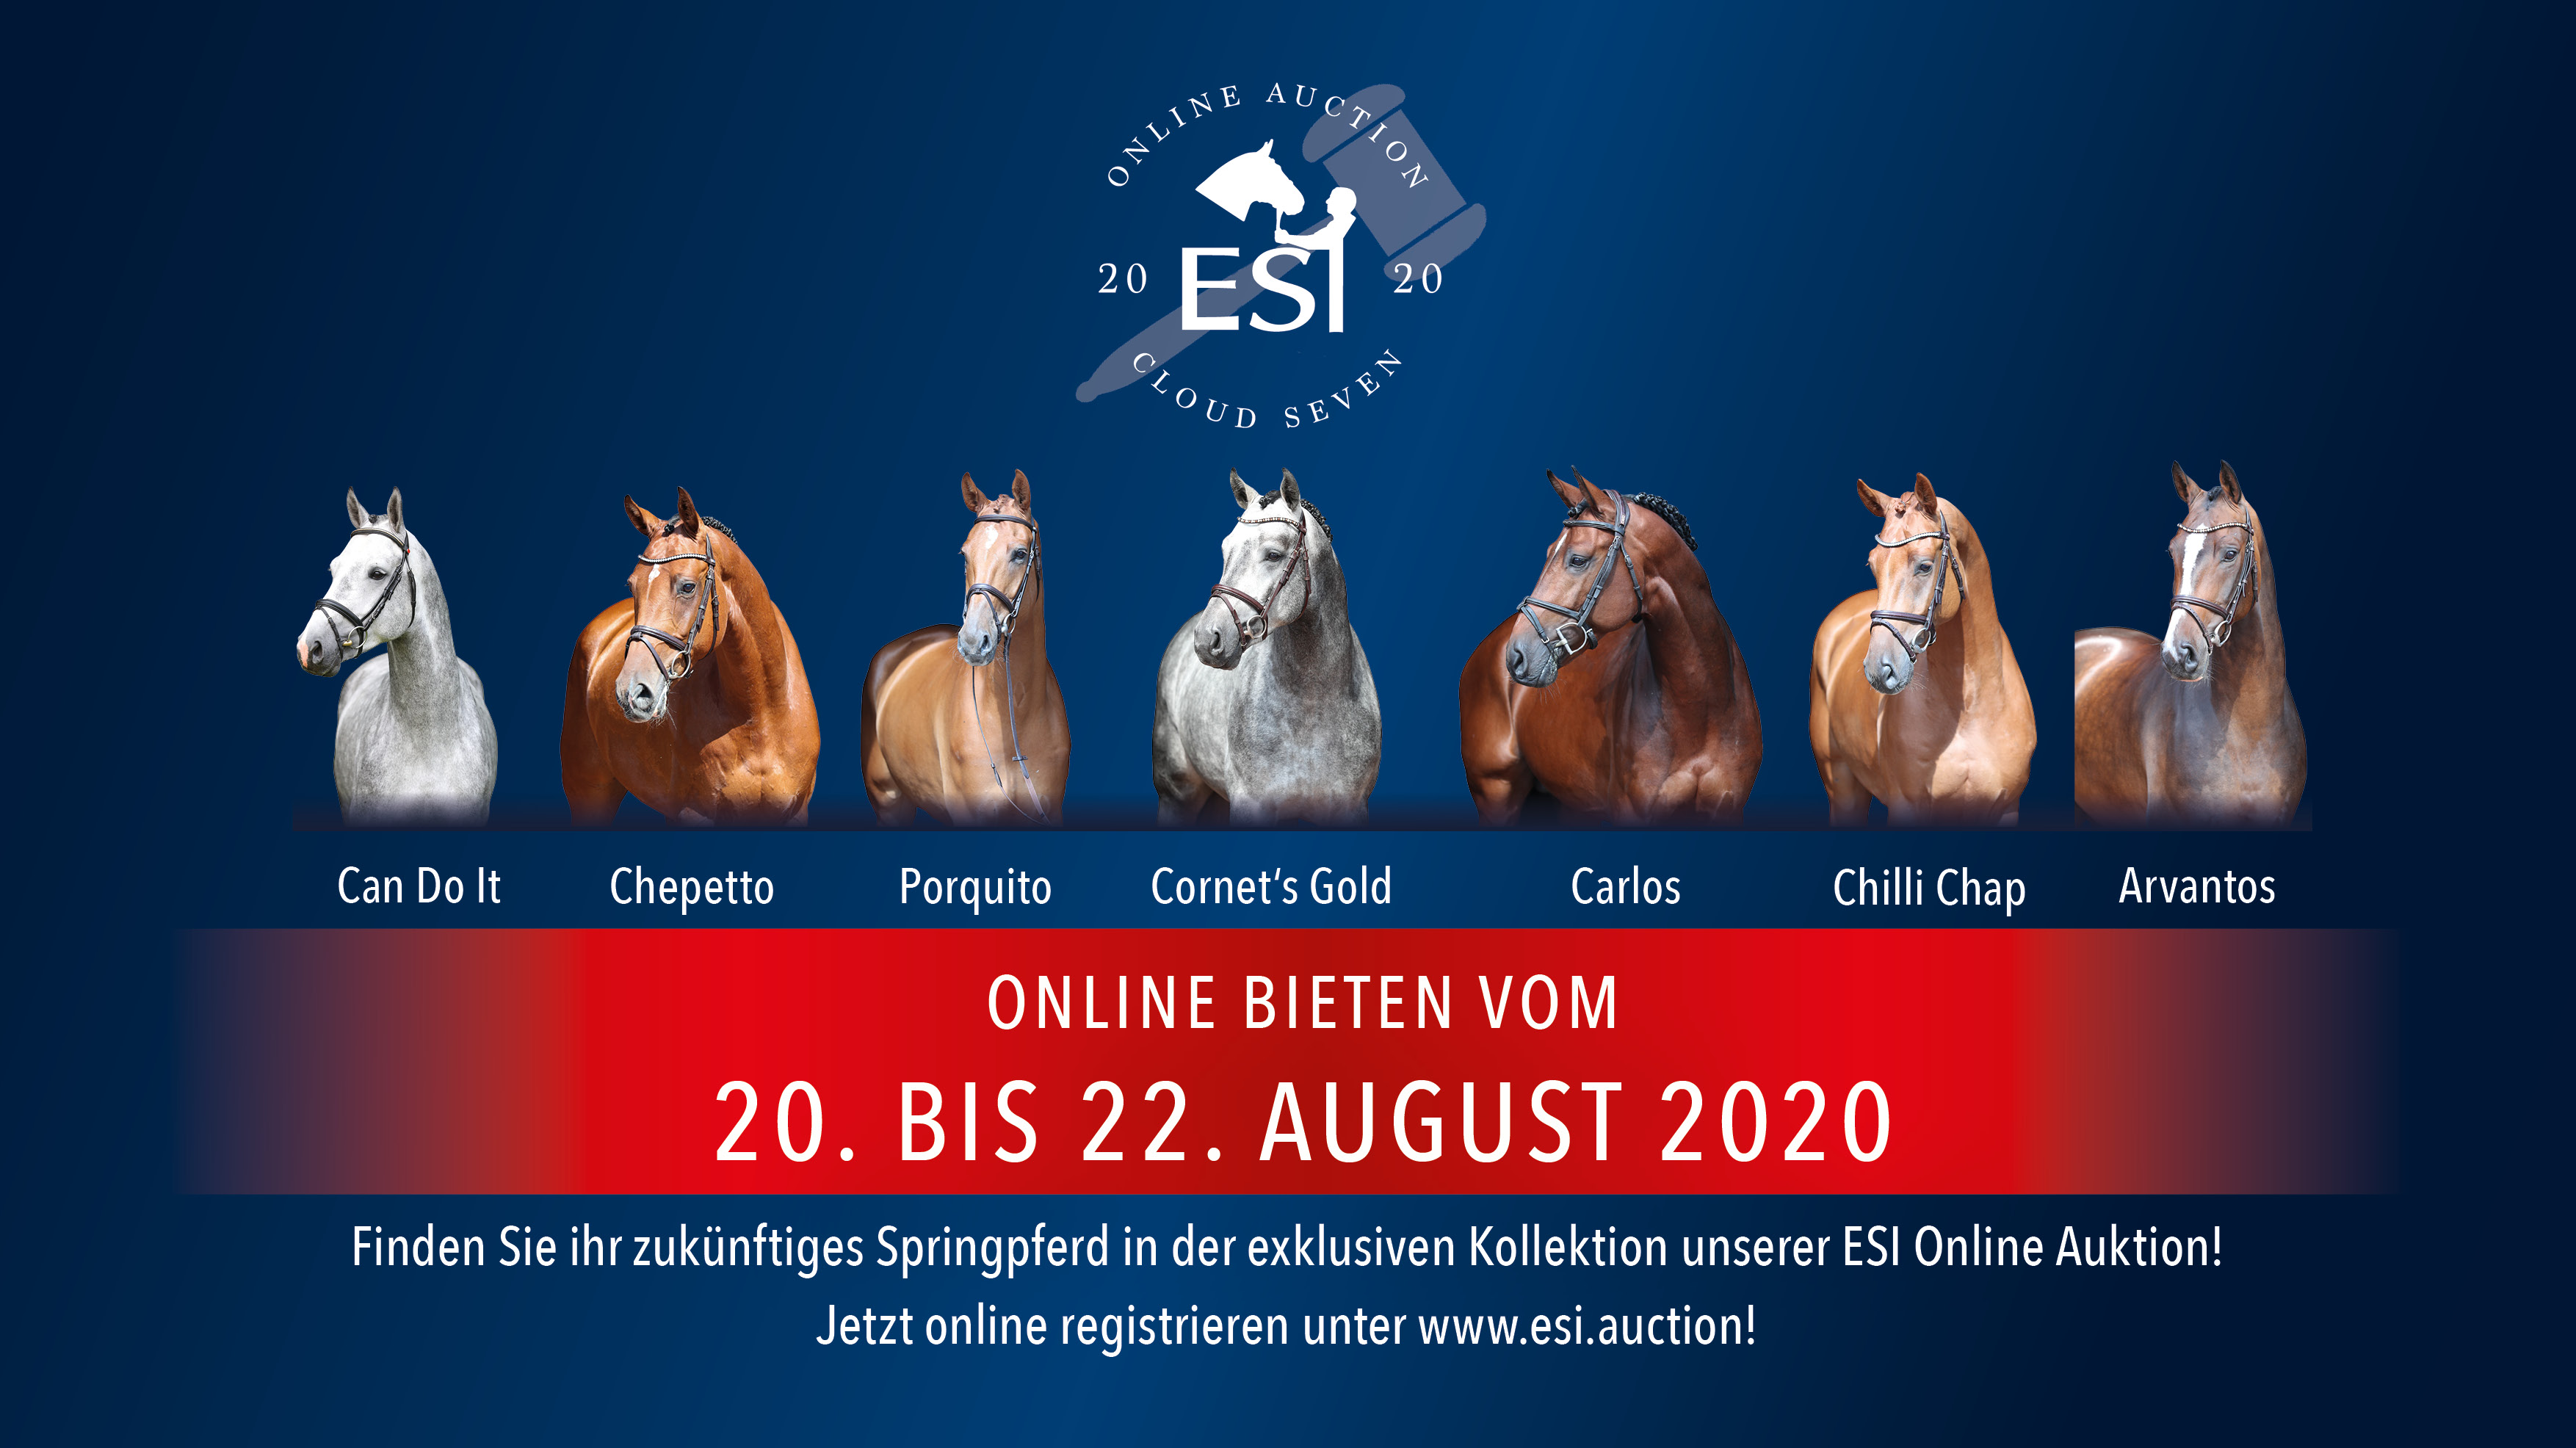 Bidding for the second ESI 'Cloud Seven' online auction starts now!